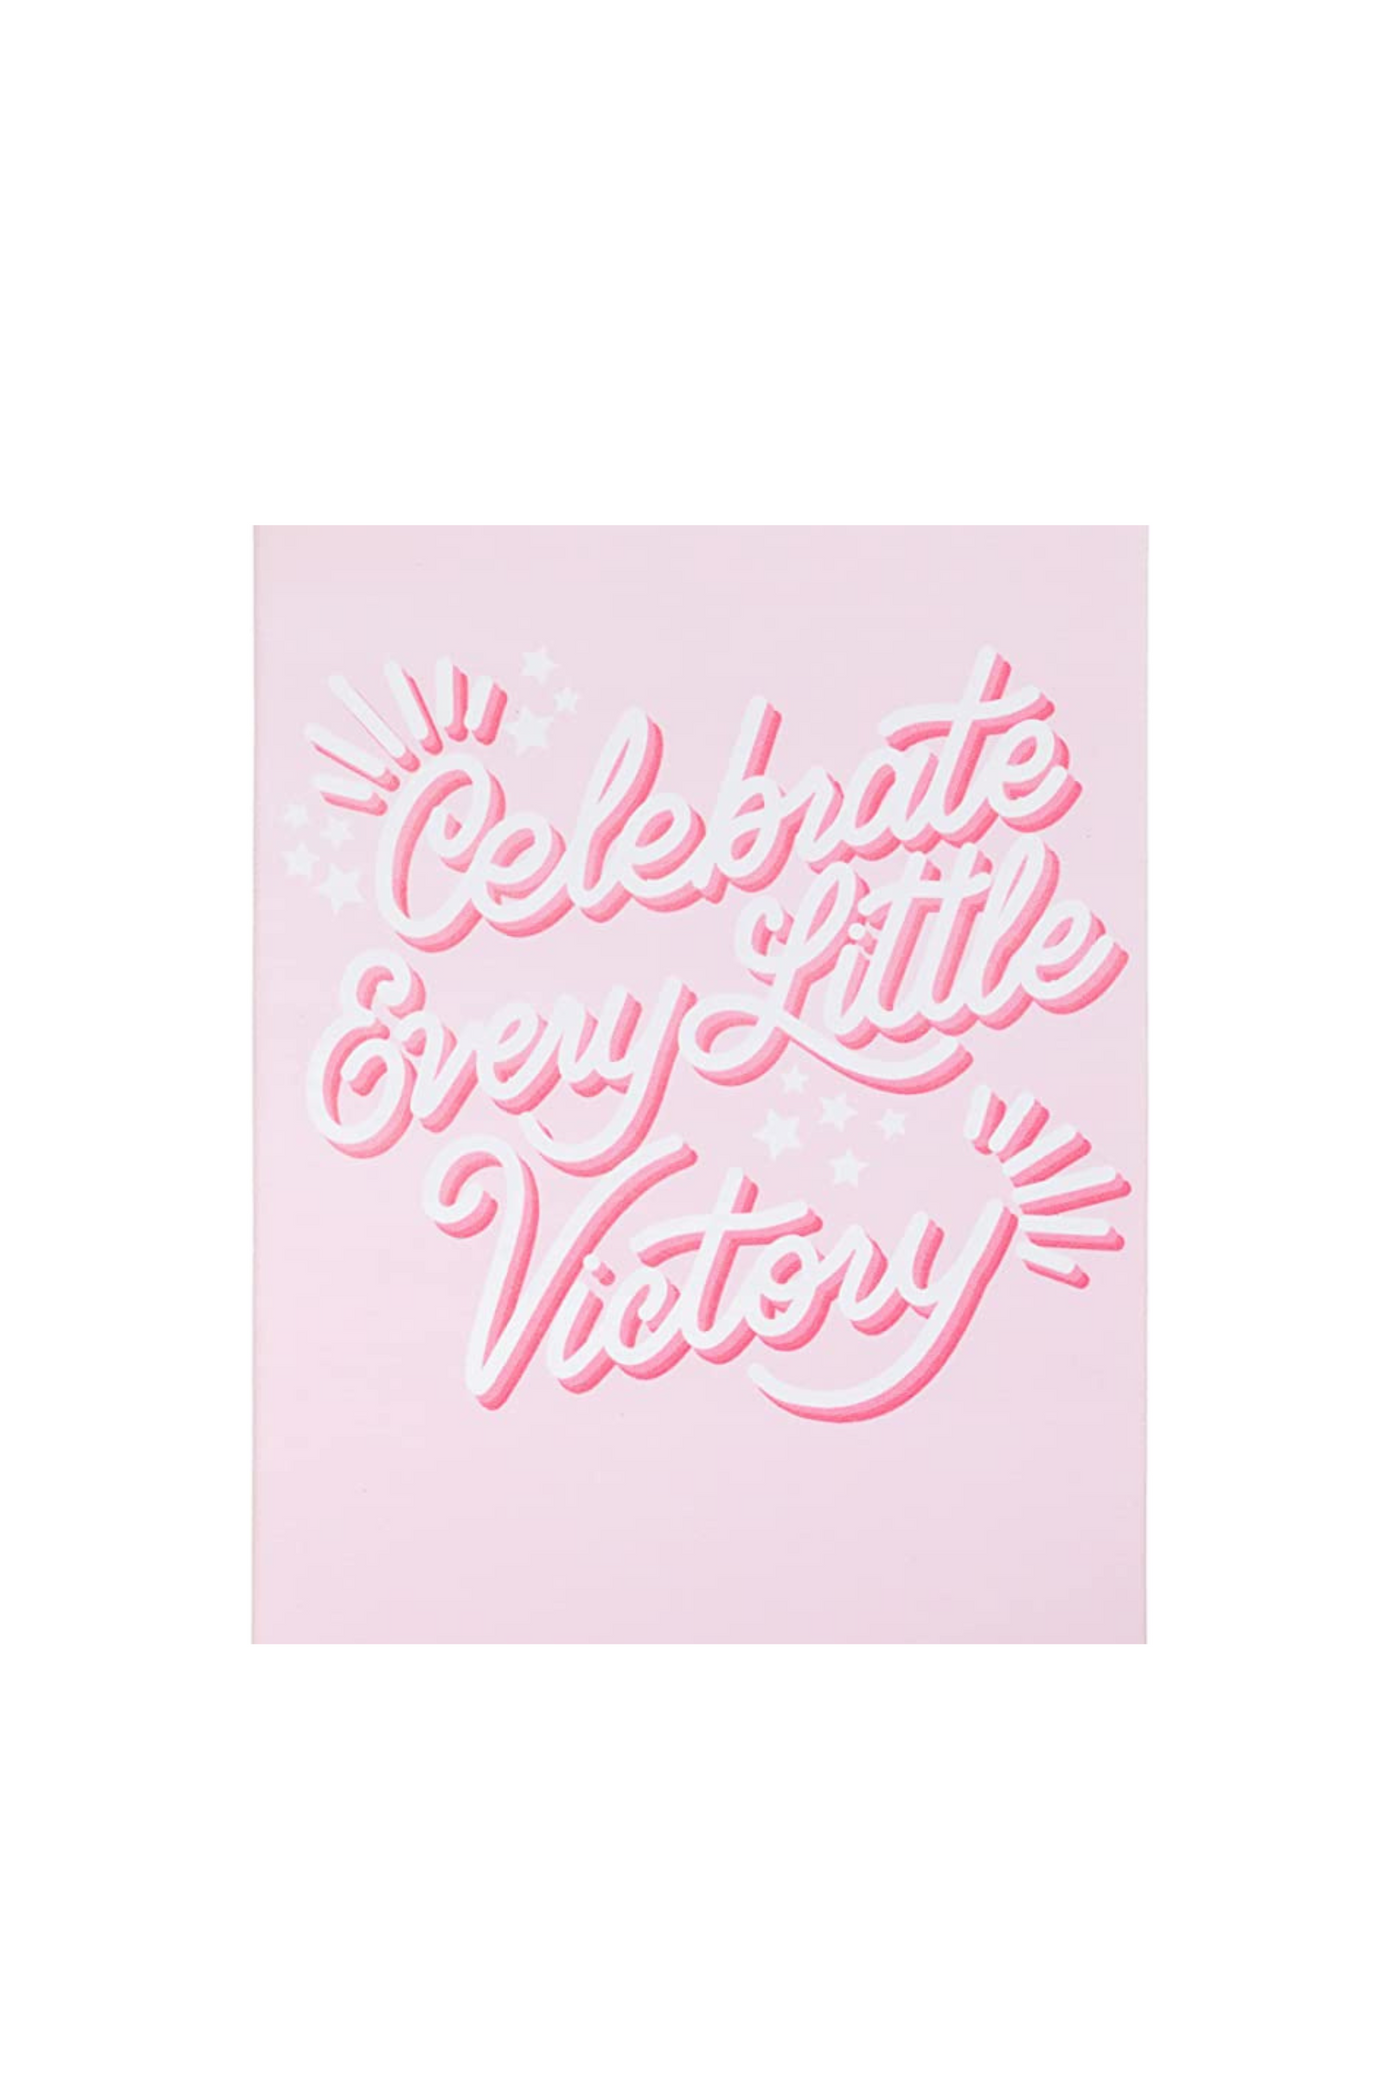 Celebrate Every Victory Journal